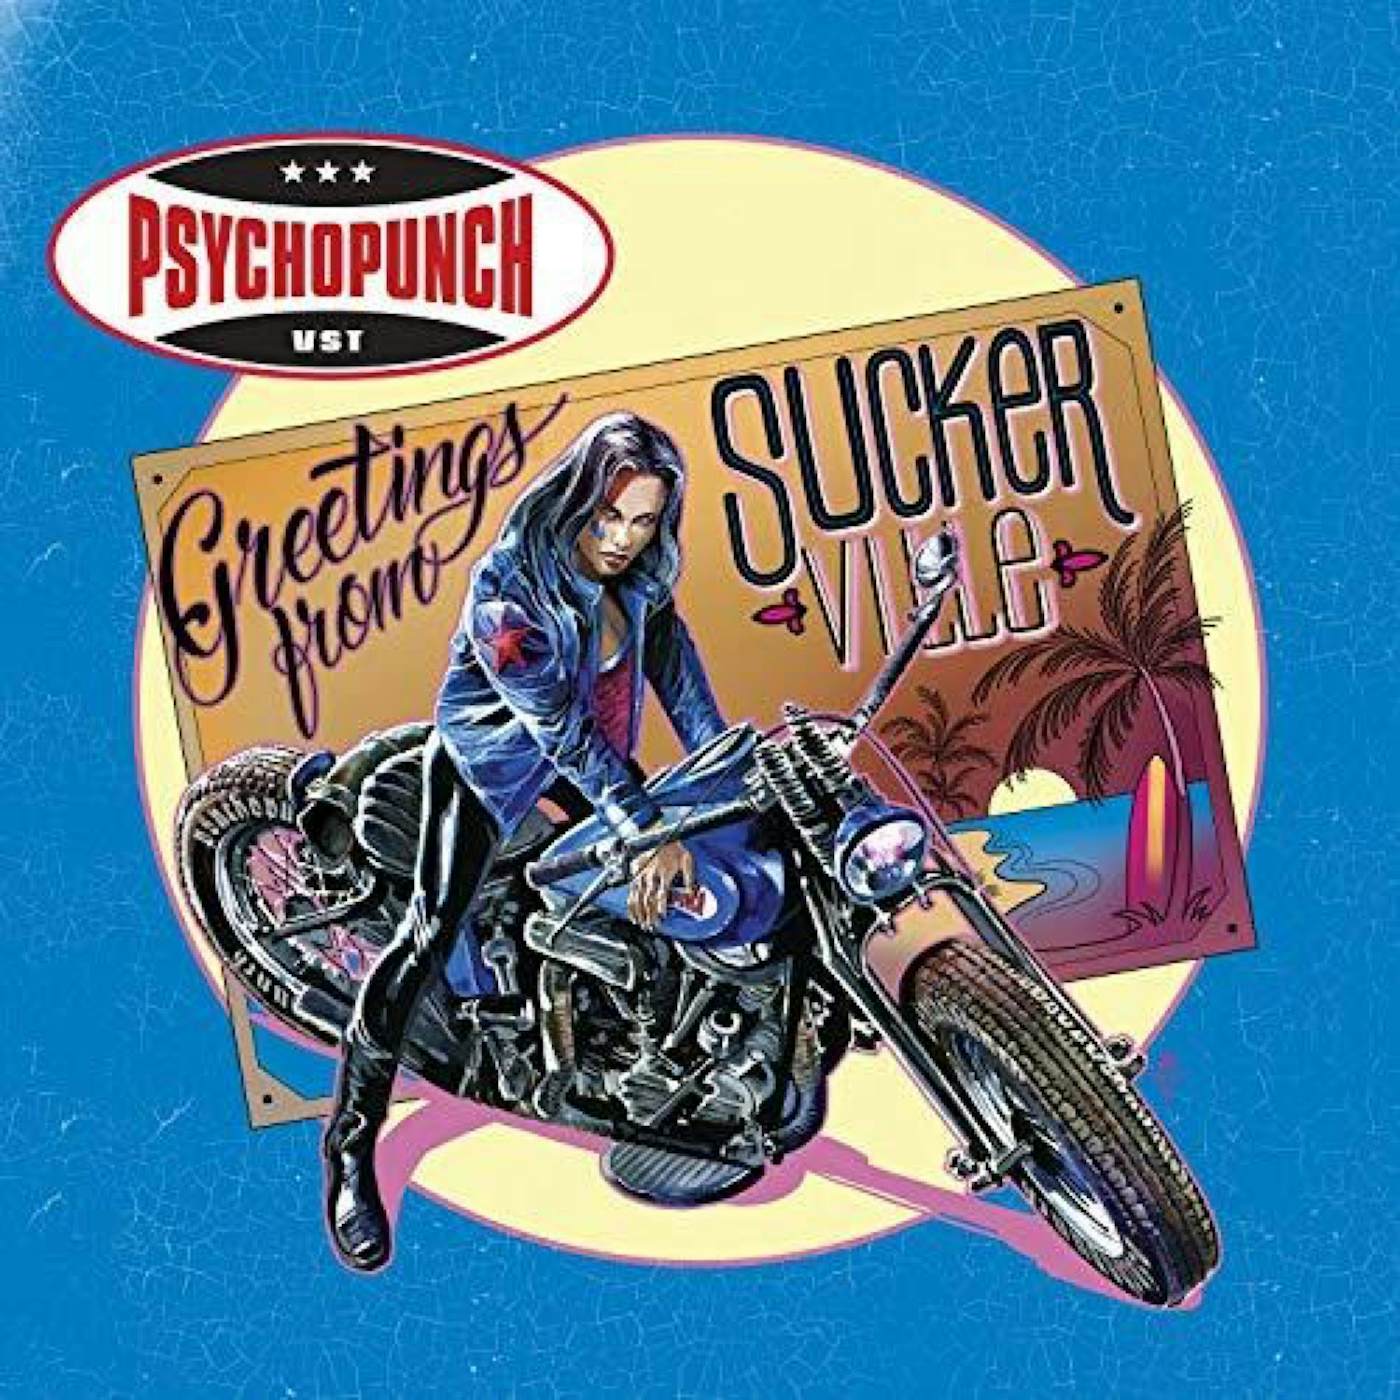 Psychopunch Greetings from suckerville CD